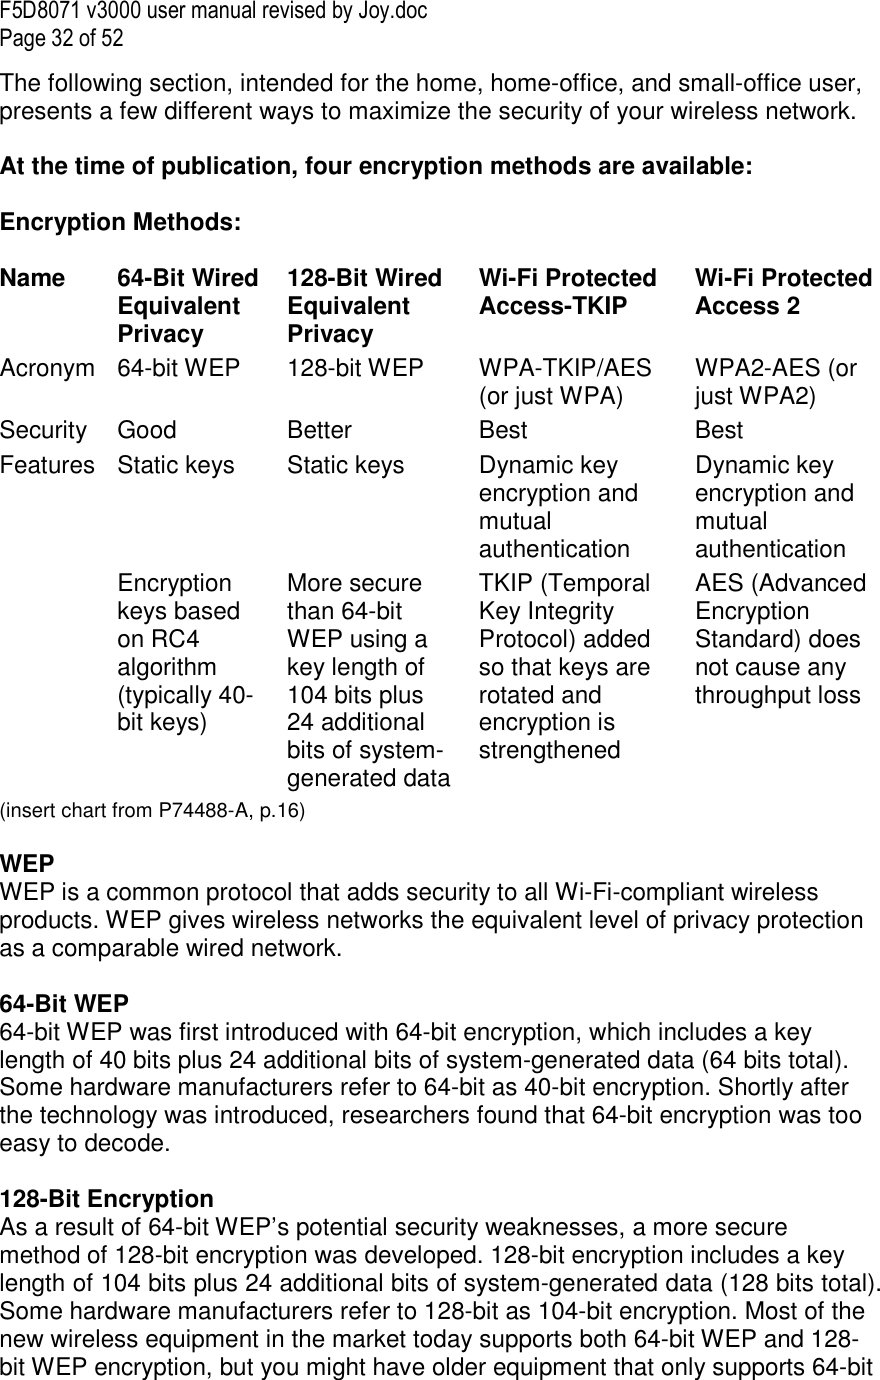 F5D8071 v3000 user manual revised by Joy.doc Page 32 of 52 The following section, intended for the home, home-office, and small-office user, presents a few different ways to maximize the security of your wireless network.  At the time of publication, four encryption methods are available:  Encryption Methods:  Name 64-Bit Wired Equivalent Privacy 128-Bit Wired Equivalent Privacy Wi-Fi Protected Access-TKIP Wi-Fi Protected Access 2 Acronym 64-bit WEP  128-bit WEP  WPA-TKIP/AES (or just WPA)  WPA2-AES (or just WPA2) Security  Good  Better  Best  Best Features Static keys   Static keys   Dynamic key encryption and mutual authentication Dynamic key encryption and mutual authentication   Encryption keys based on RC4 algorithm (typically 40-bit keys) More secure than 64-bit WEP using a key length of 104 bits plus 24 additional bits of system-generated data TKIP (Temporal Key Integrity Protocol) added so that keys are rotated and encryption is strengthened AES (Advanced Encryption Standard) does not cause any throughput loss (insert chart from P74488-A, p.16)  WEP  WEP is a common protocol that adds security to all Wi-Fi-compliant wireless products. WEP gives wireless networks the equivalent level of privacy protection as a comparable wired network.  64-Bit WEP 64-bit WEP was first introduced with 64-bit encryption, which includes a key length of 40 bits plus 24 additional bits of system-generated data (64 bits total). Some hardware manufacturers refer to 64-bit as 40-bit encryption. Shortly after the technology was introduced, researchers found that 64-bit encryption was too easy to decode.  128-Bit Encryption As a result of 64-bit WEP’s potential security weaknesses, a more secure method of 128-bit encryption was developed. 128-bit encryption includes a key length of 104 bits plus 24 additional bits of system-generated data (128 bits total). Some hardware manufacturers refer to 128-bit as 104-bit encryption. Most of the new wireless equipment in the market today supports both 64-bit WEP and 128-bit WEP encryption, but you might have older equipment that only supports 64-bit 